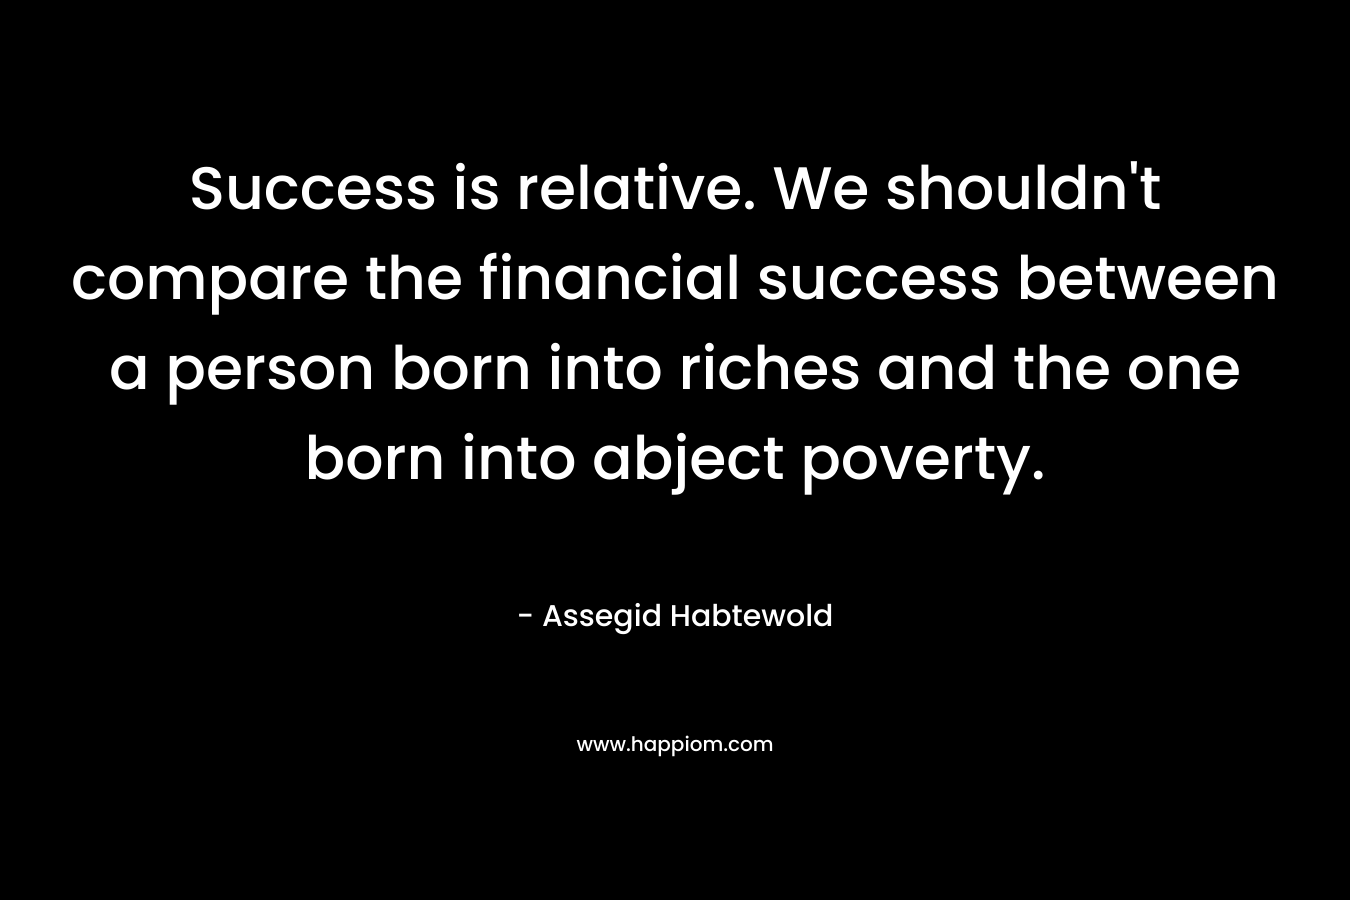 Success is relative. We shouldn’t compare the financial success between a person born into riches and the one born into abject poverty. – Assegid Habtewold